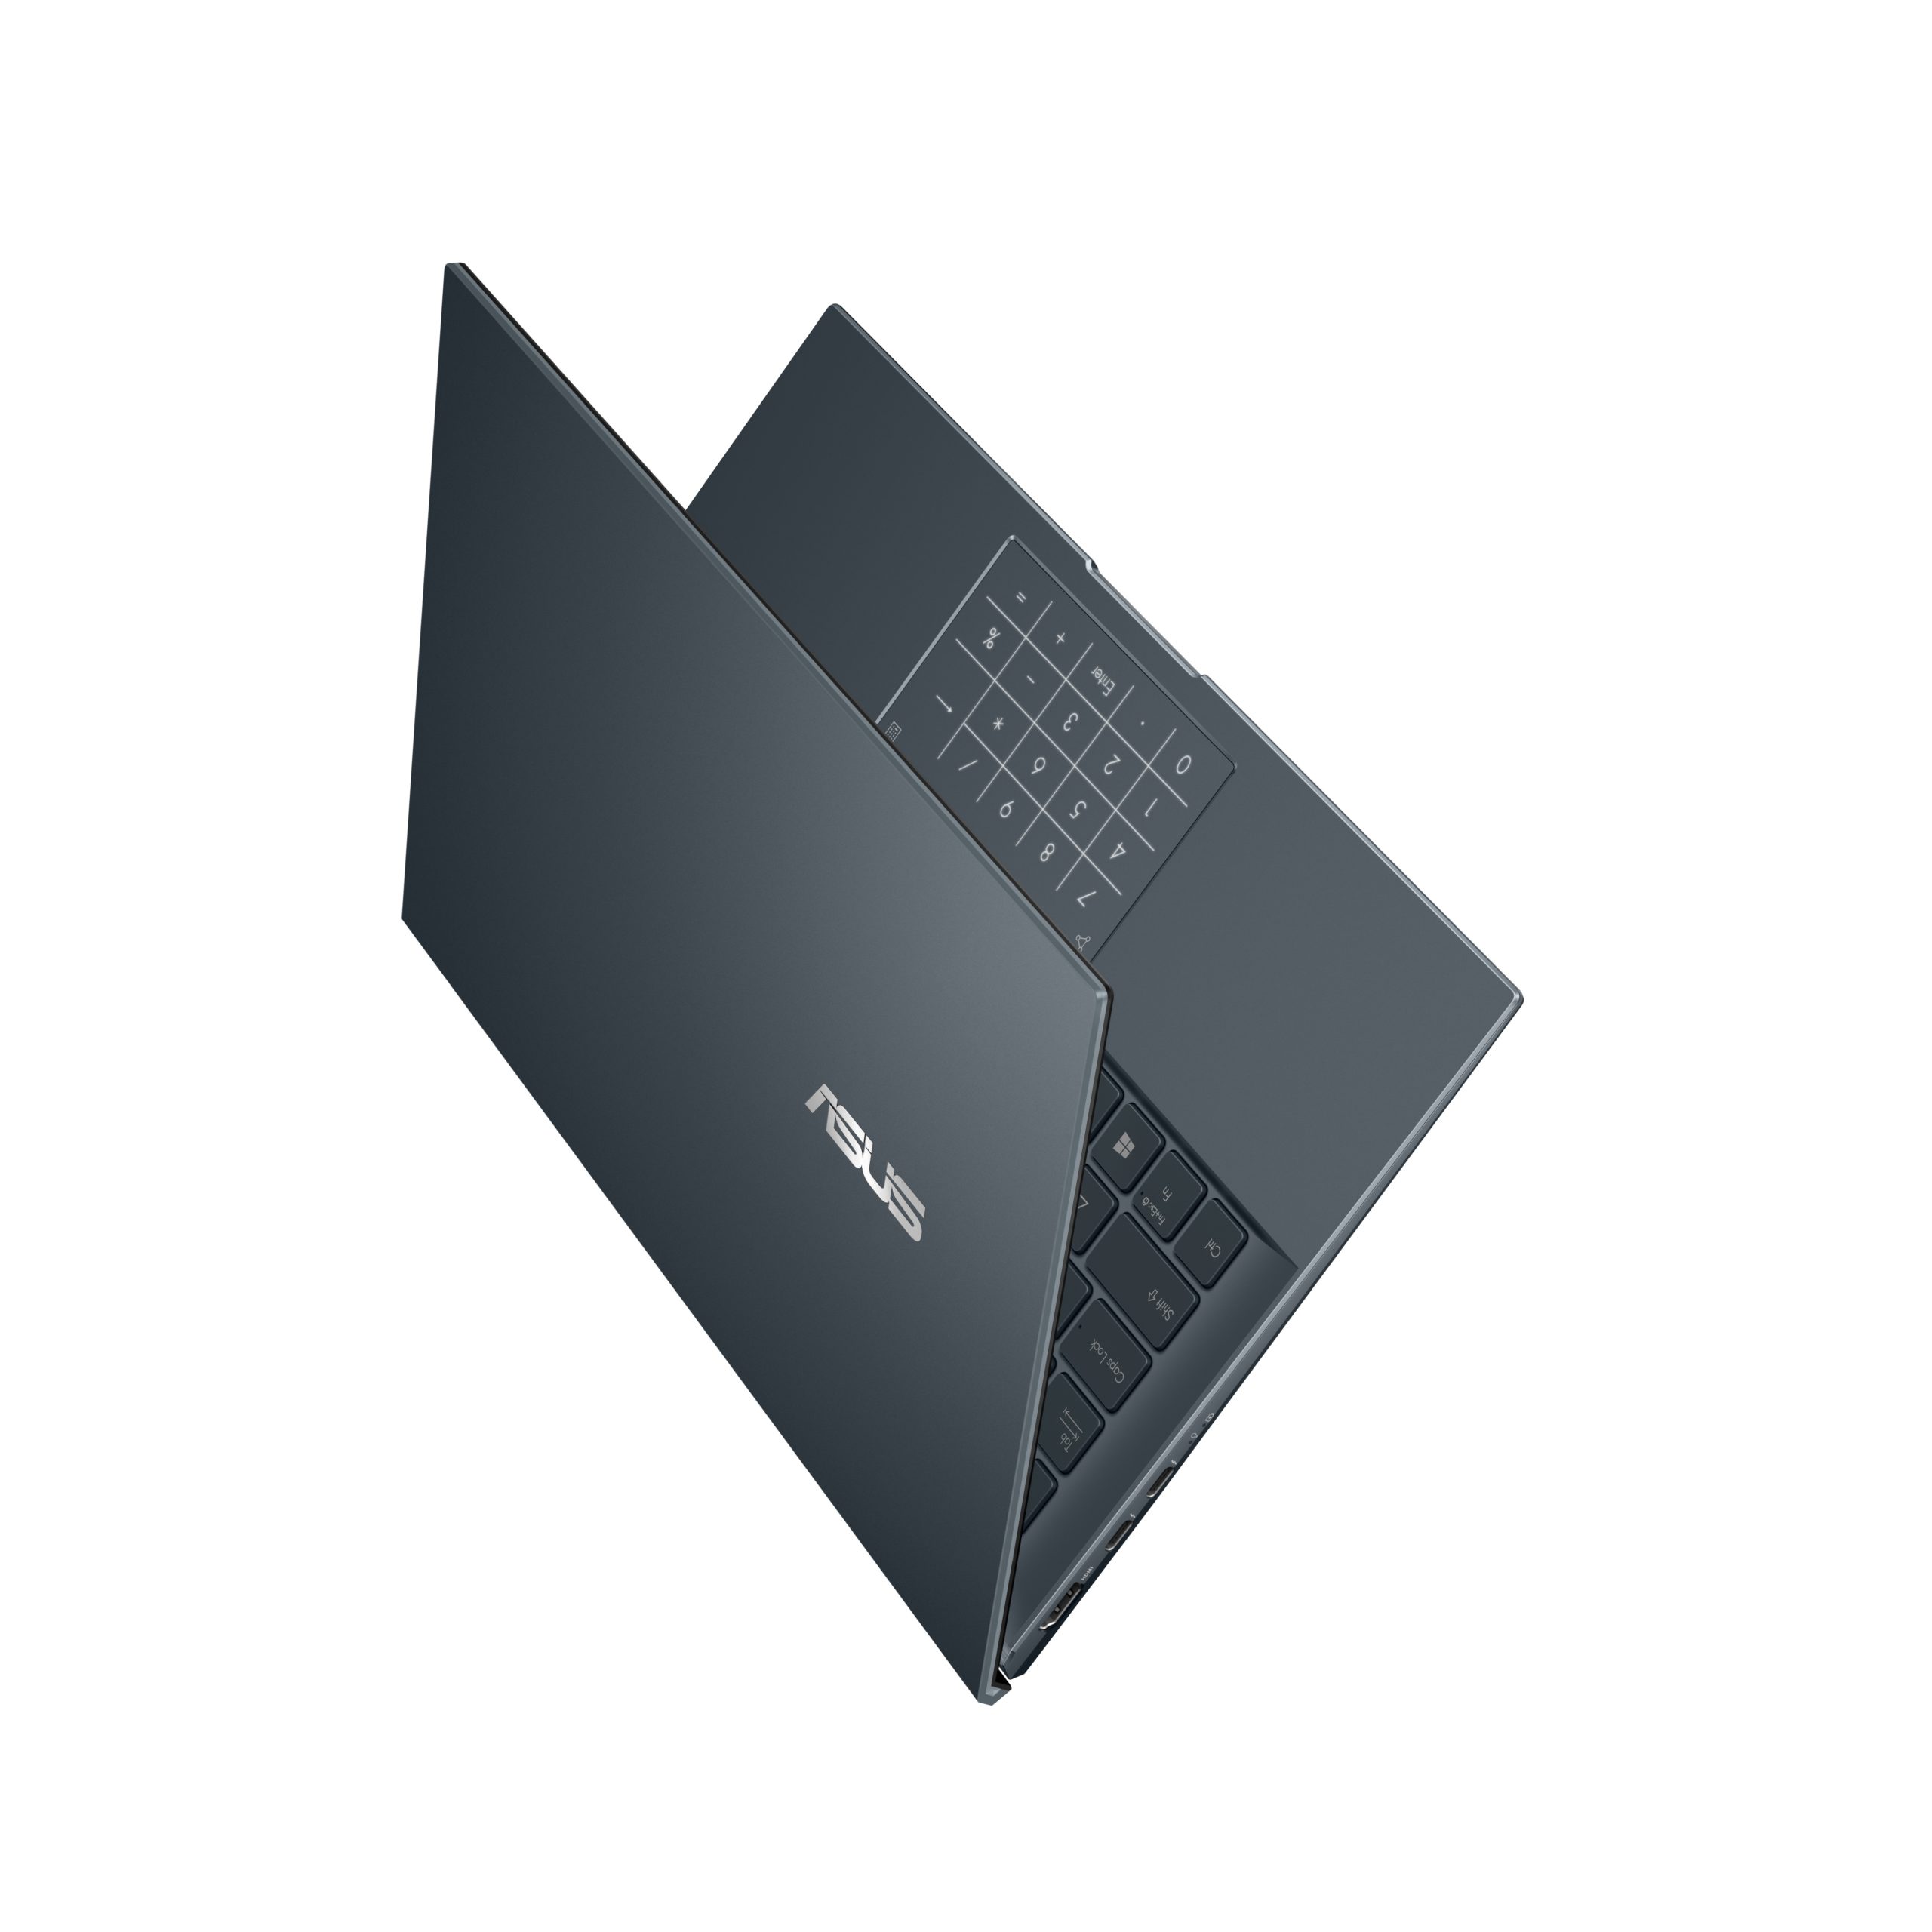 ZenBook 14 slightly open, shown from above to focus on ScreenPad